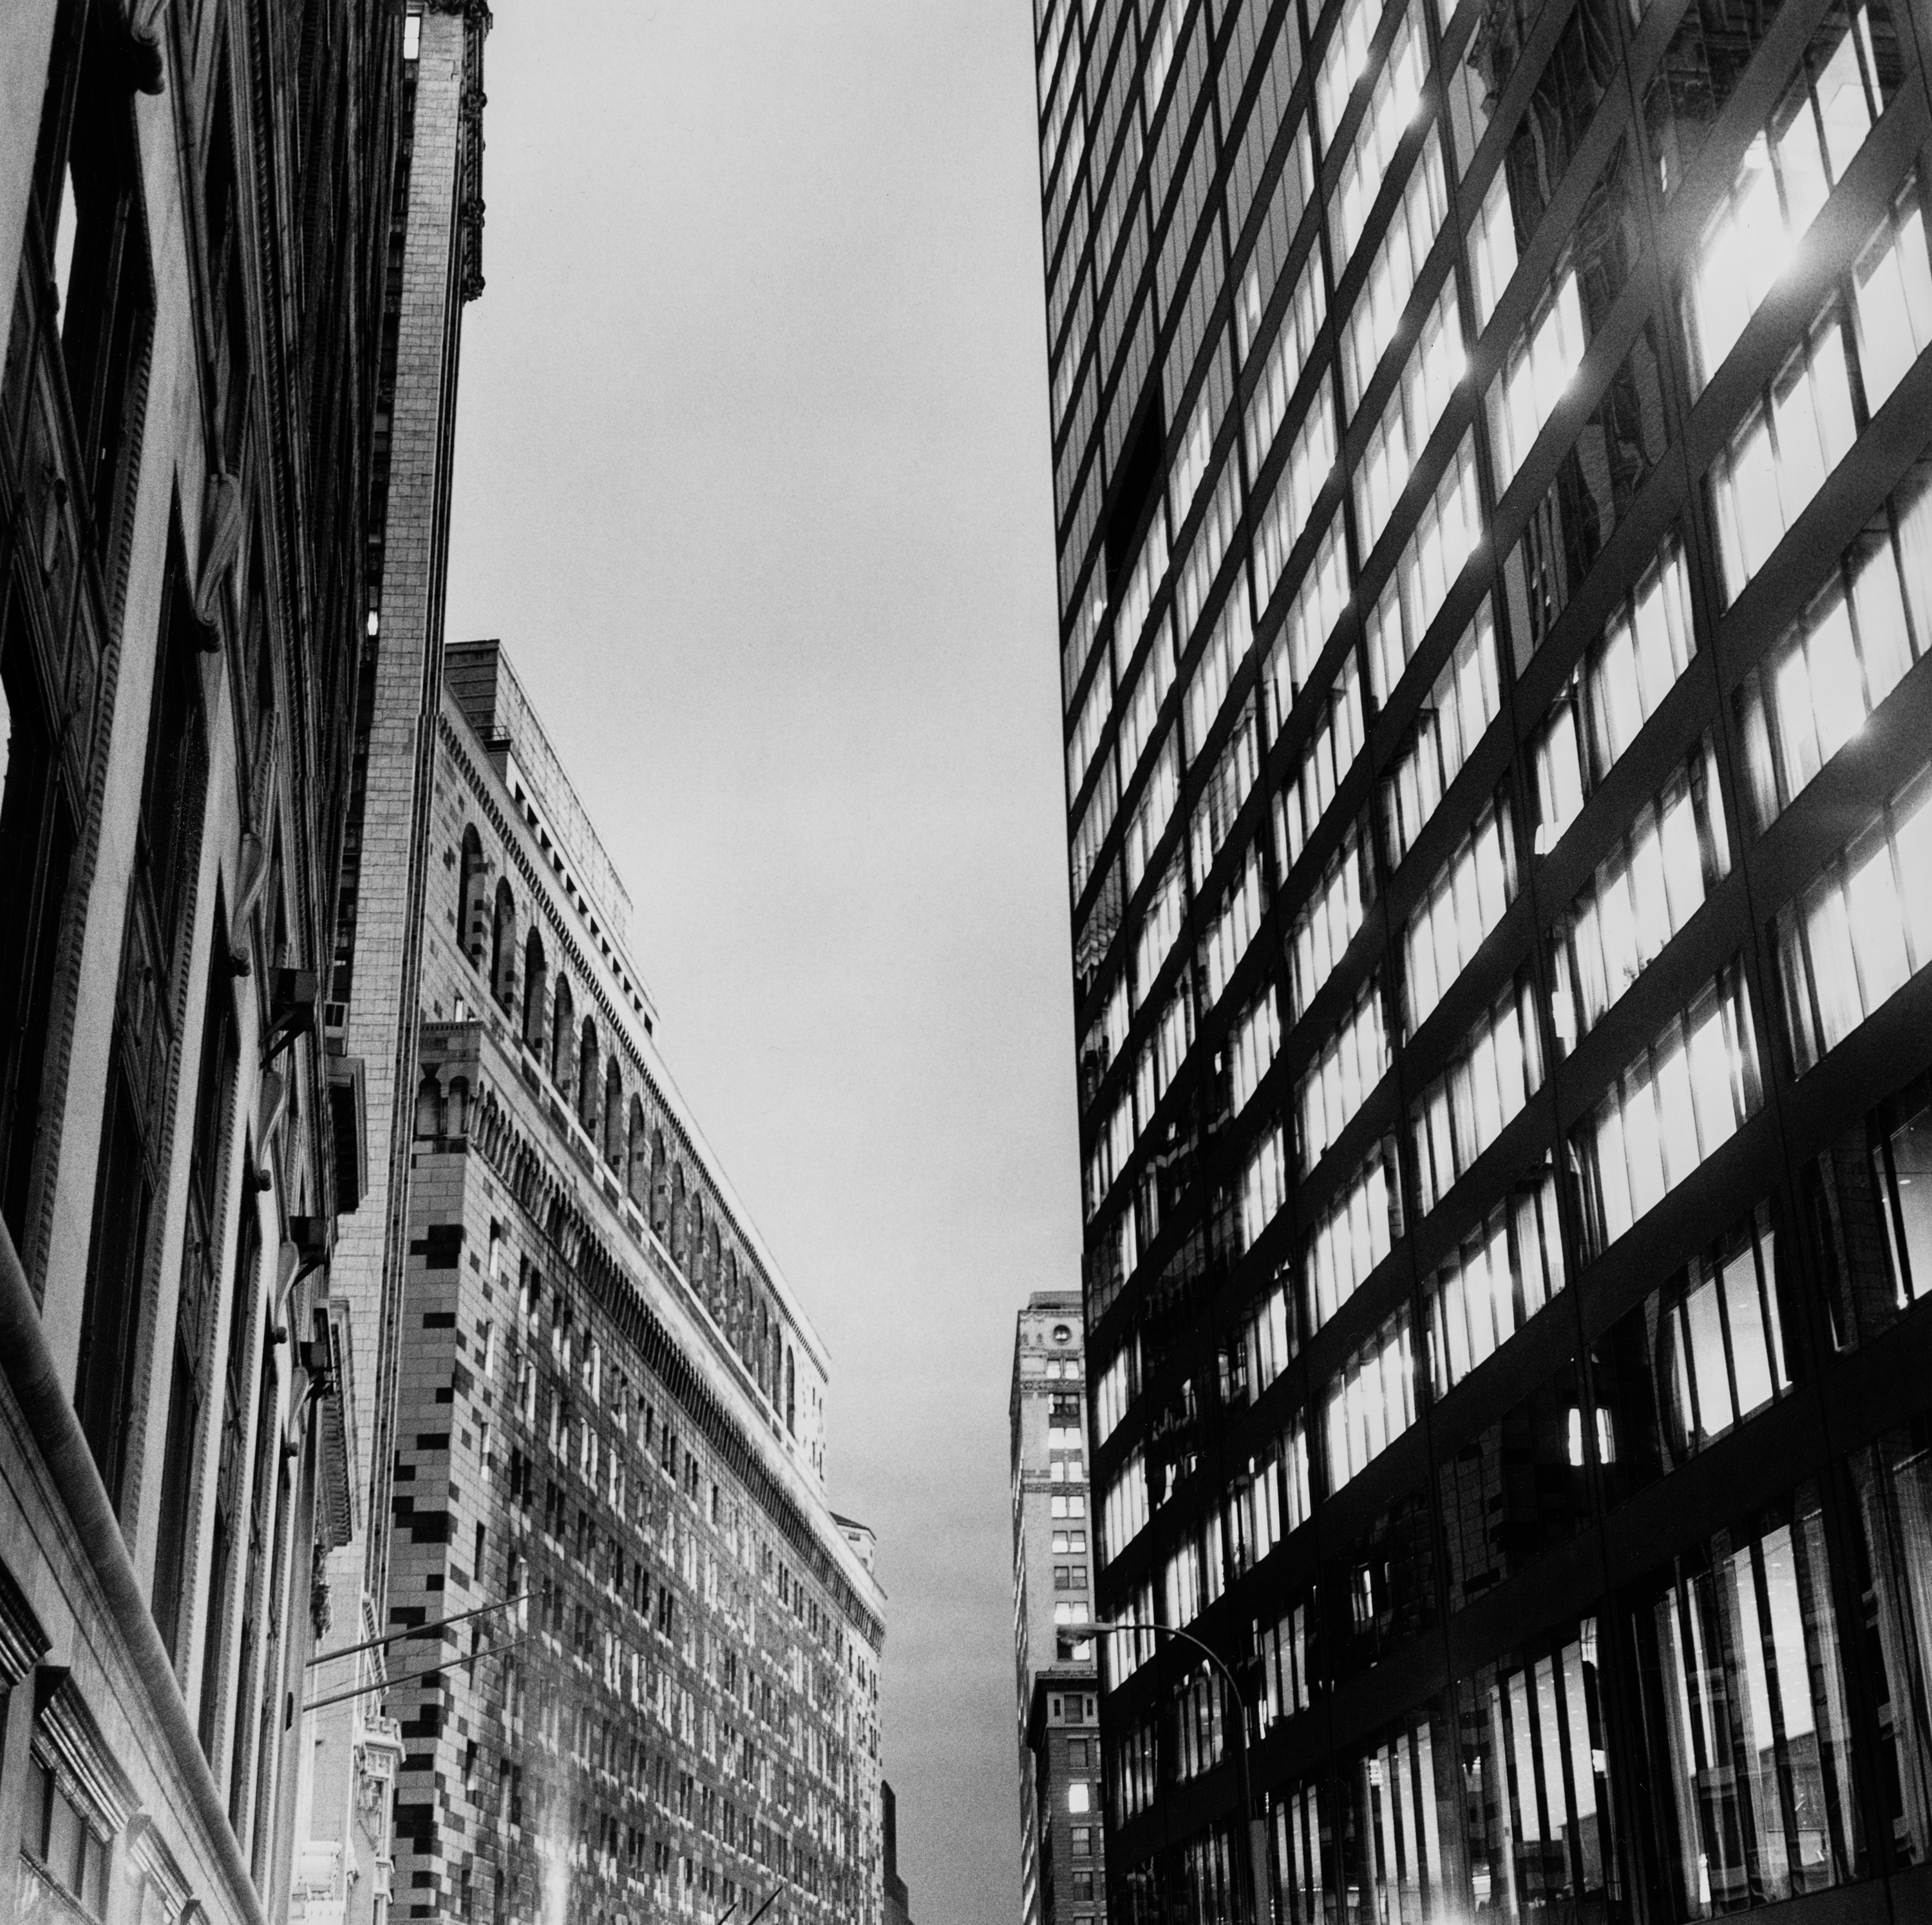 Black and white photograph of buildings in New York shot from the street